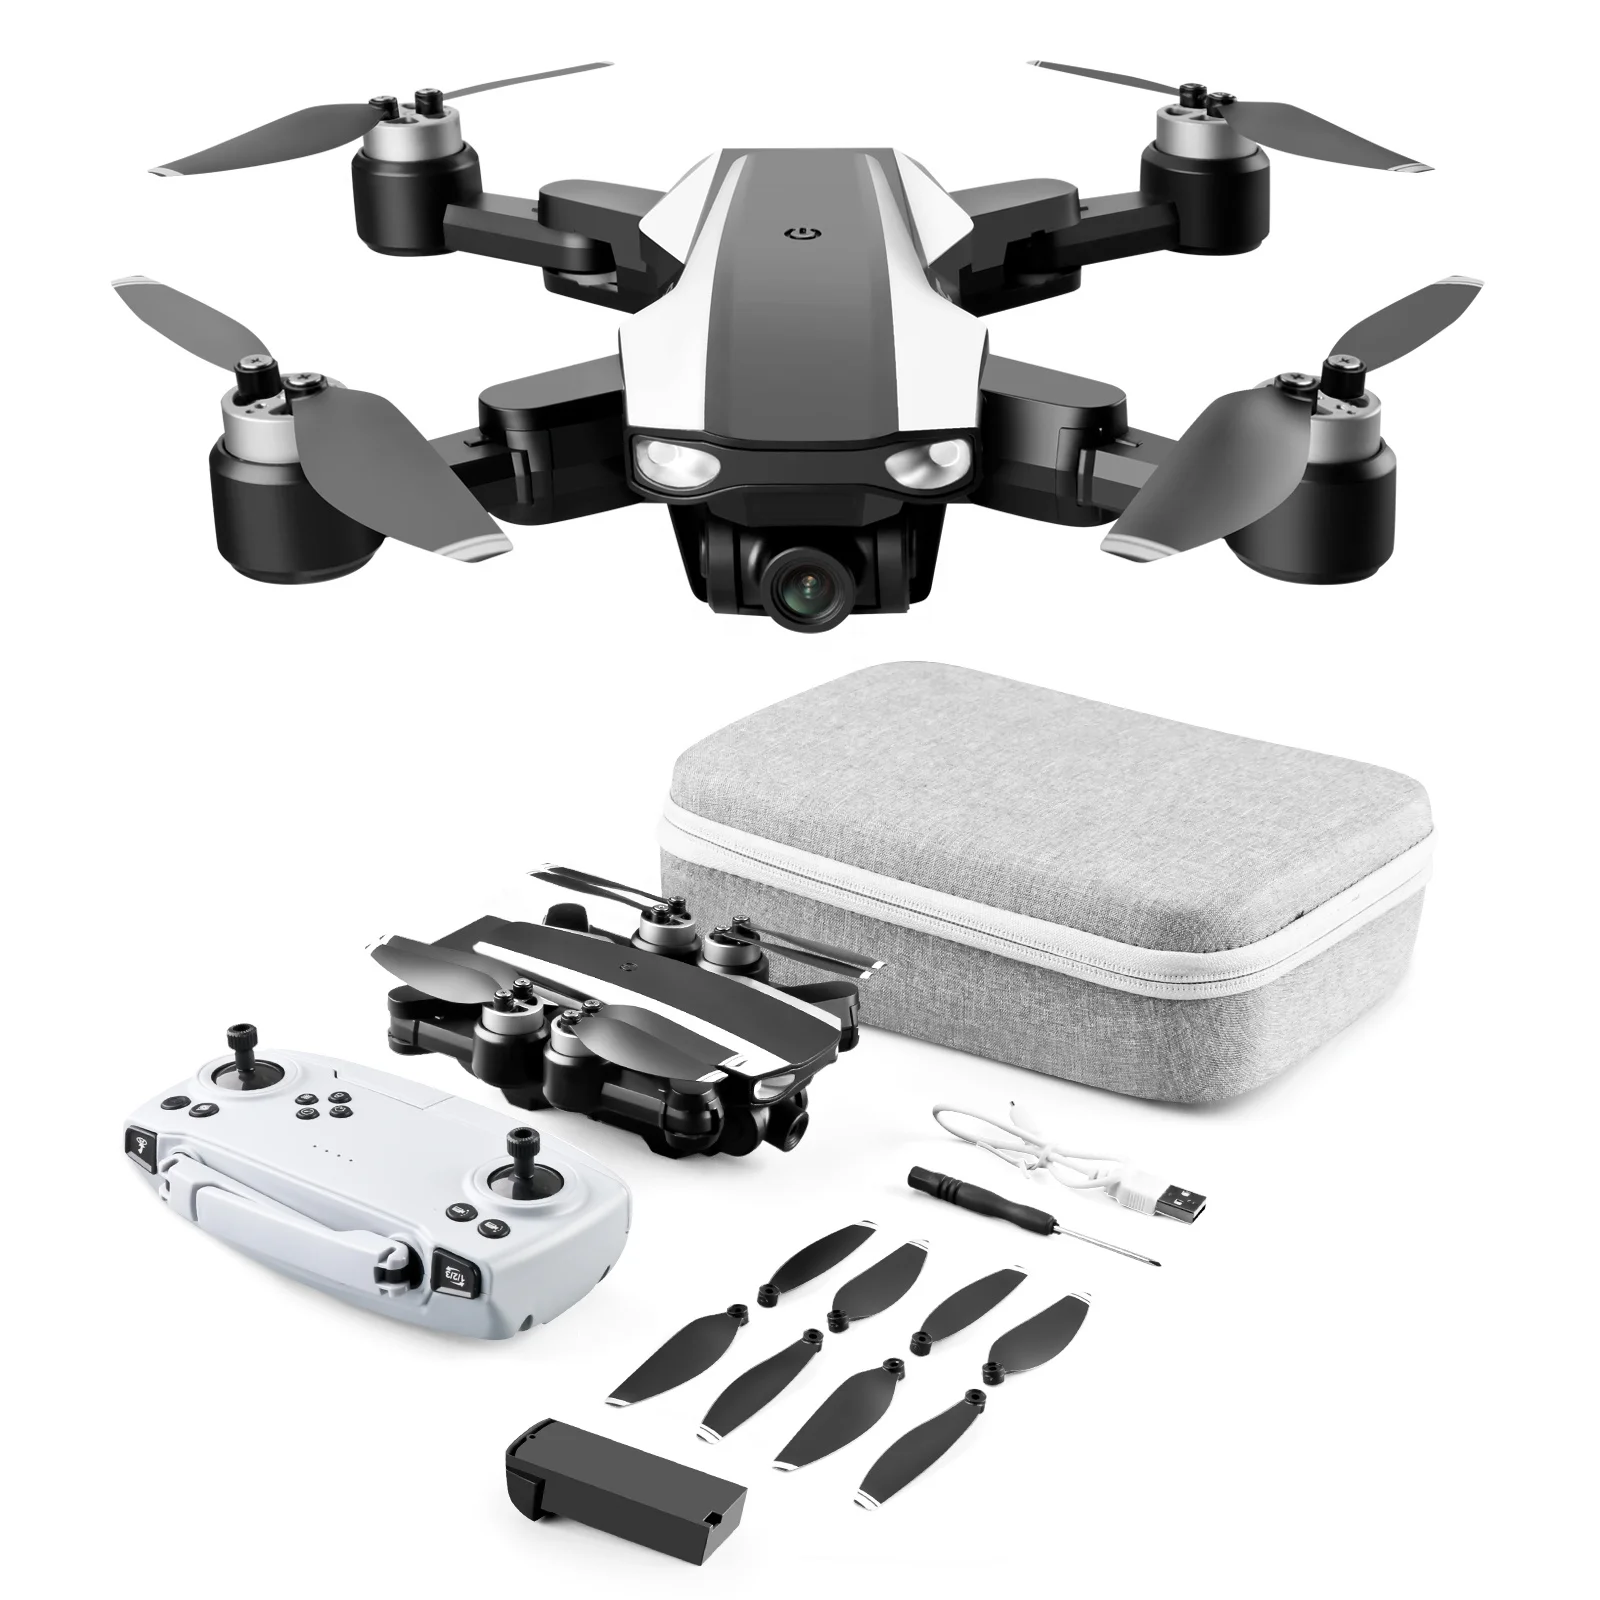 

Four-Wing Remote Professional Quadcopter Drones With Hd 4K Video Camera And Gps Long Range Control Distance Under 1000